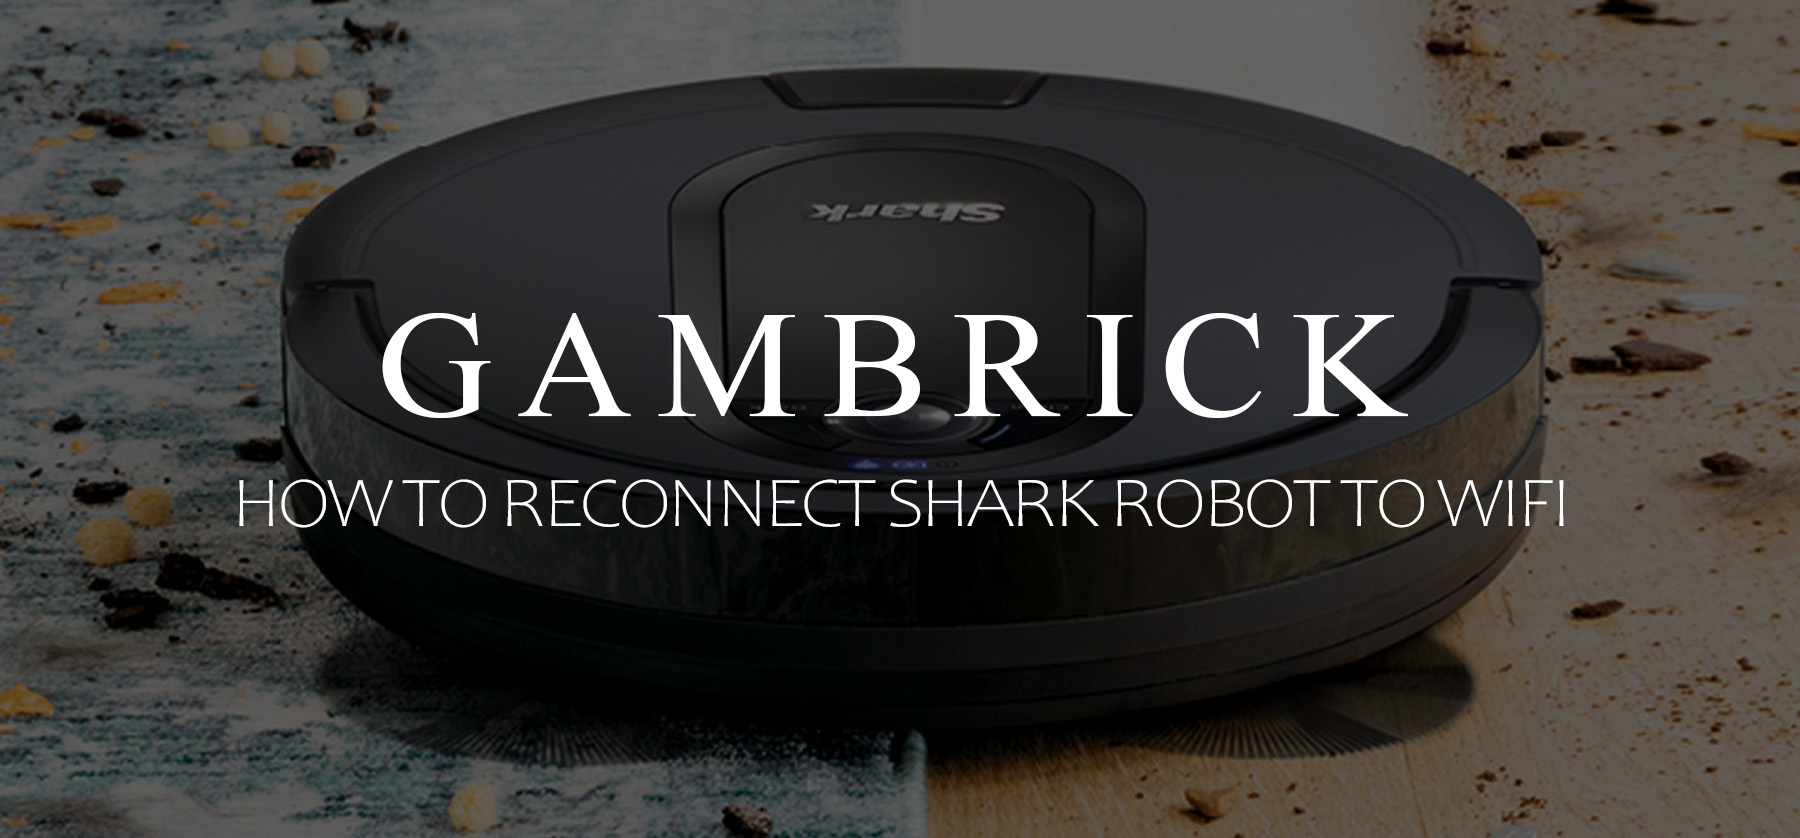 how to reconnect shark robot to wifi banner 1.0